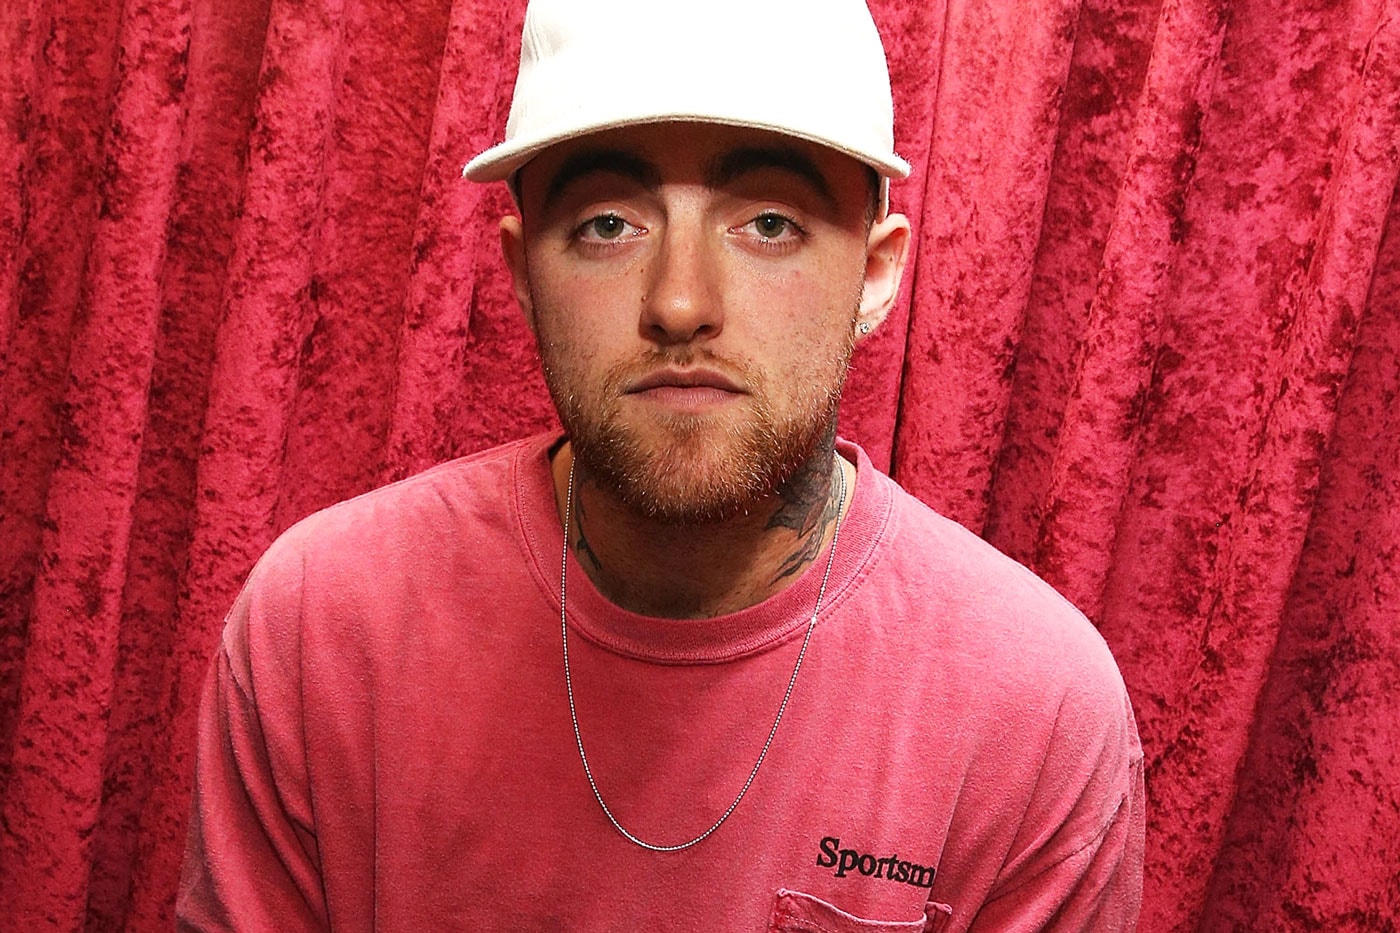 Mac Miller Releases Video for "Clubhouse"